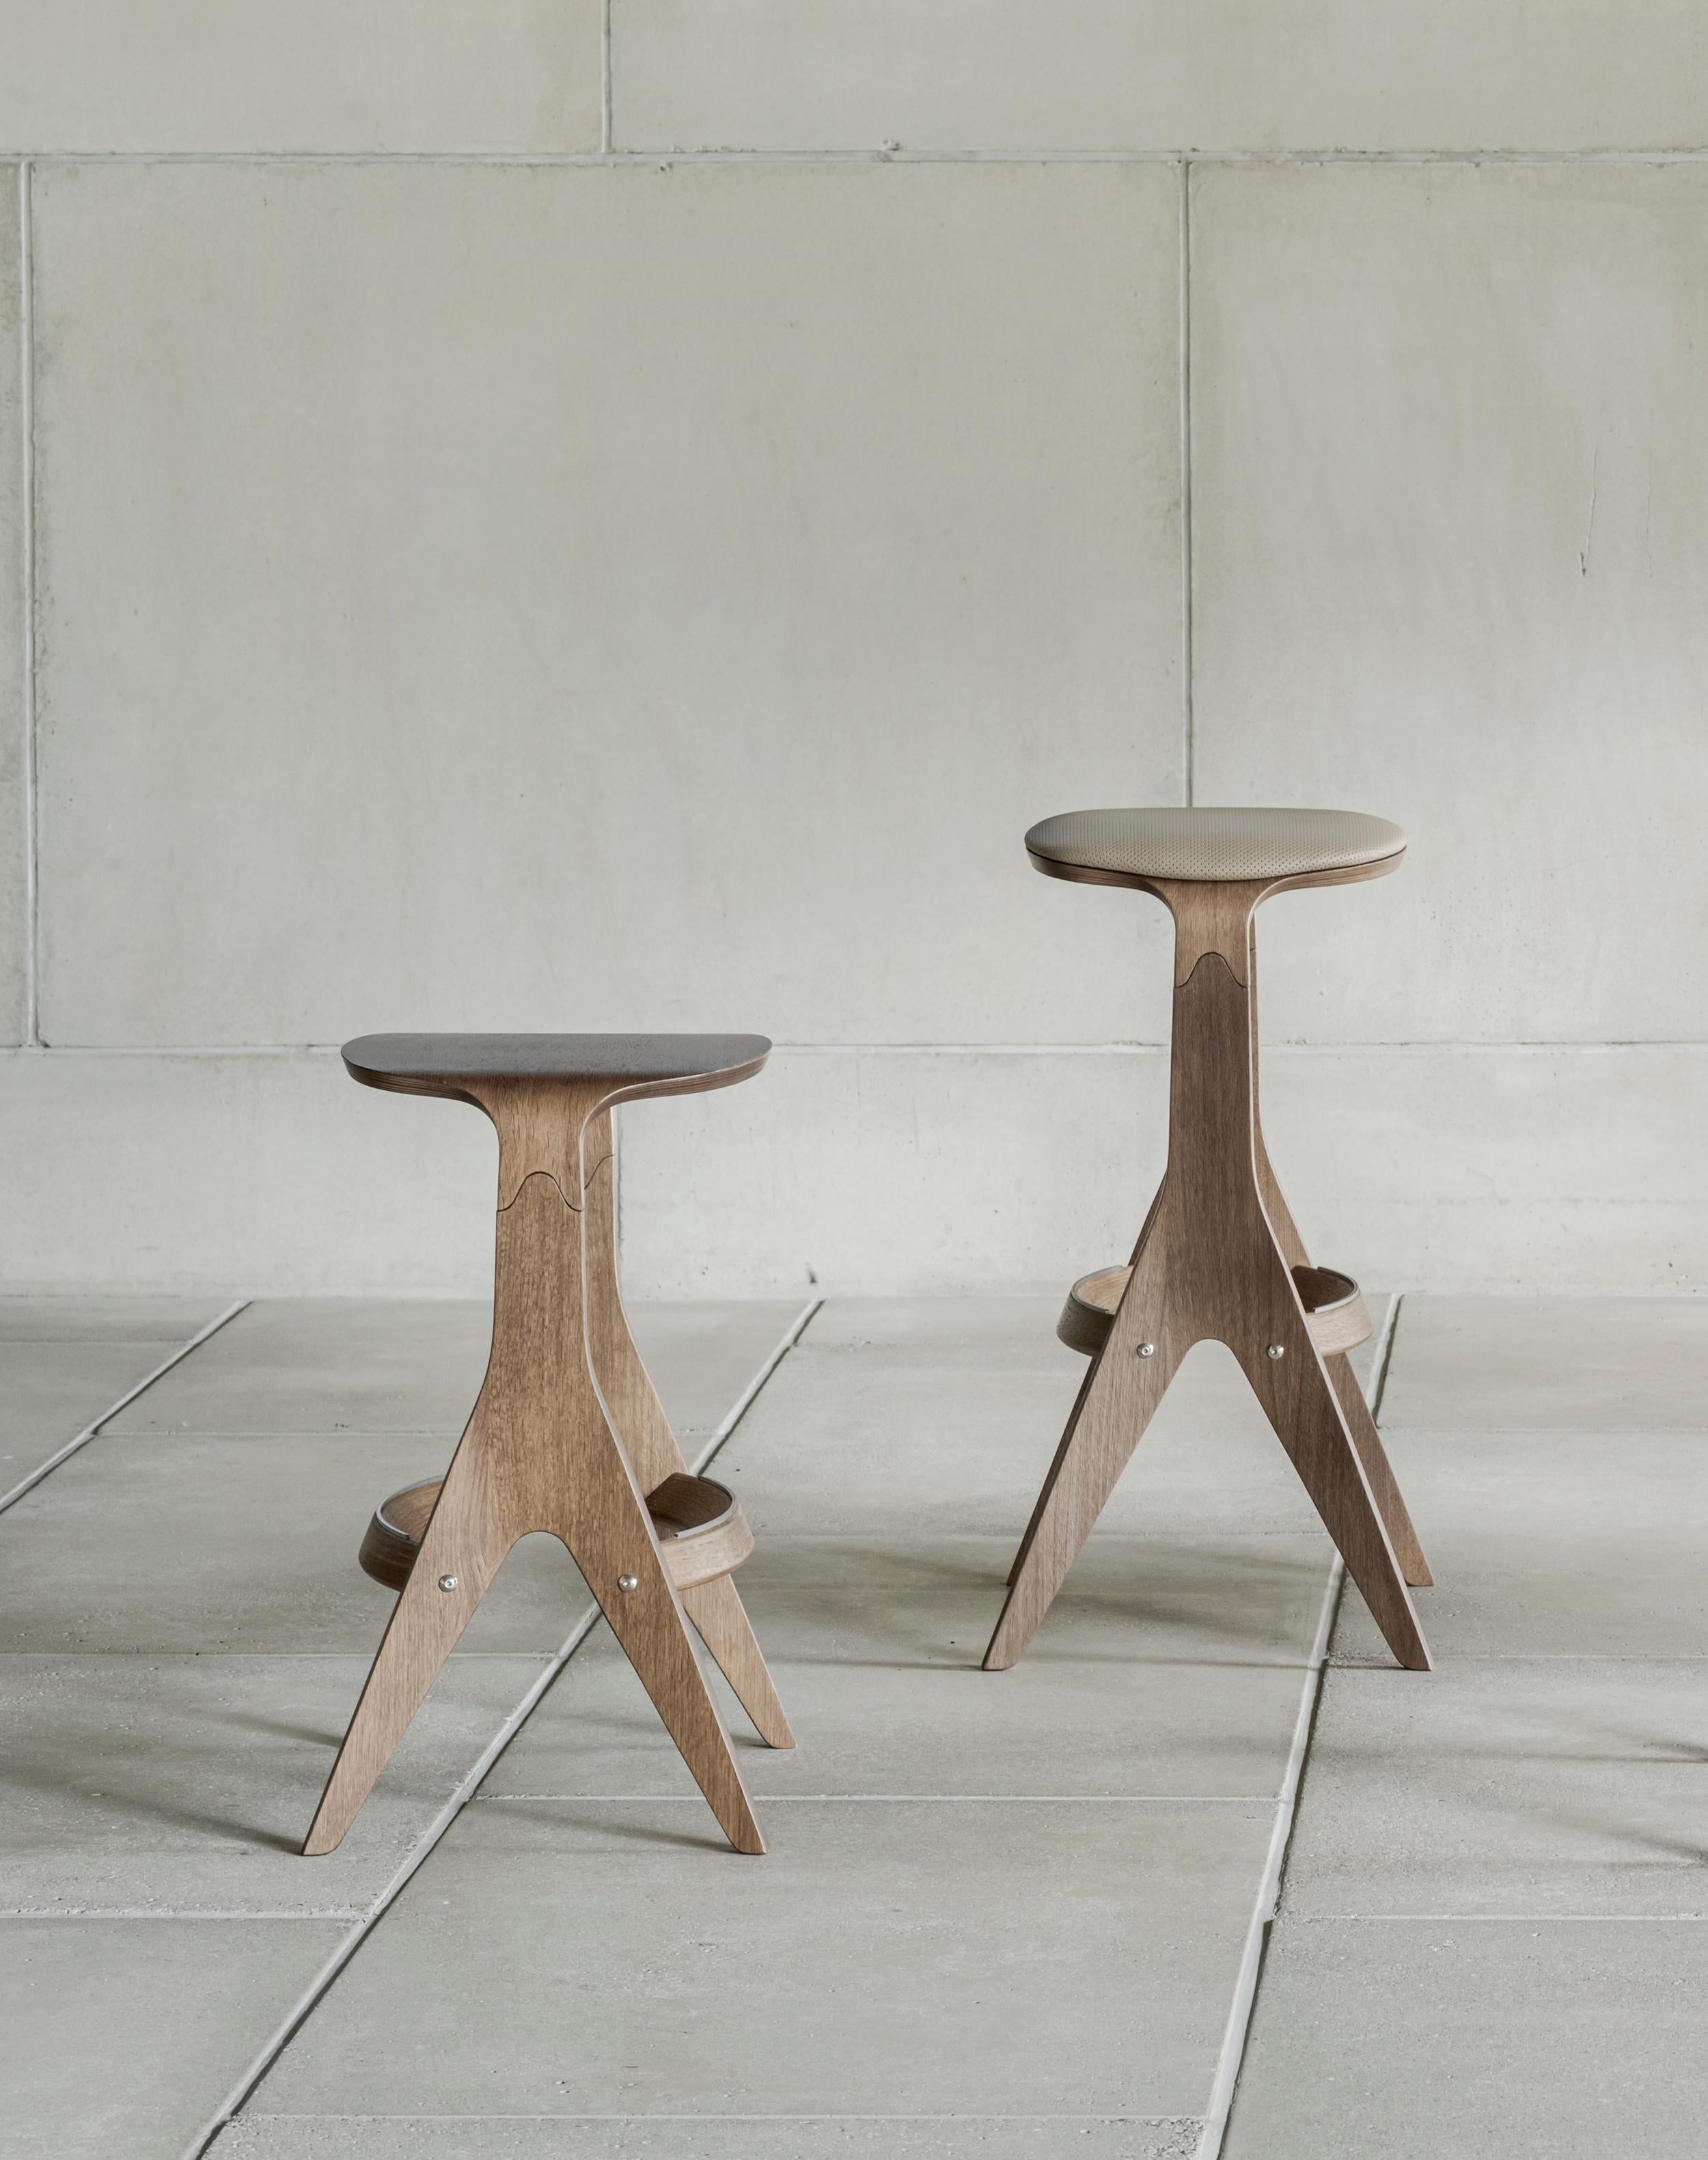 Counter stool Lavitta 65 by Poiat
Designers: Timo Mikkonen & Antti Rouhunkoski 
Lavitta 2020

Model shown: Dark oak 
Dimensions: H. 65 x 50 x 44 cm

The latest member of the Lavitta Collection, the Lavitta Counter Stool continues focusing on